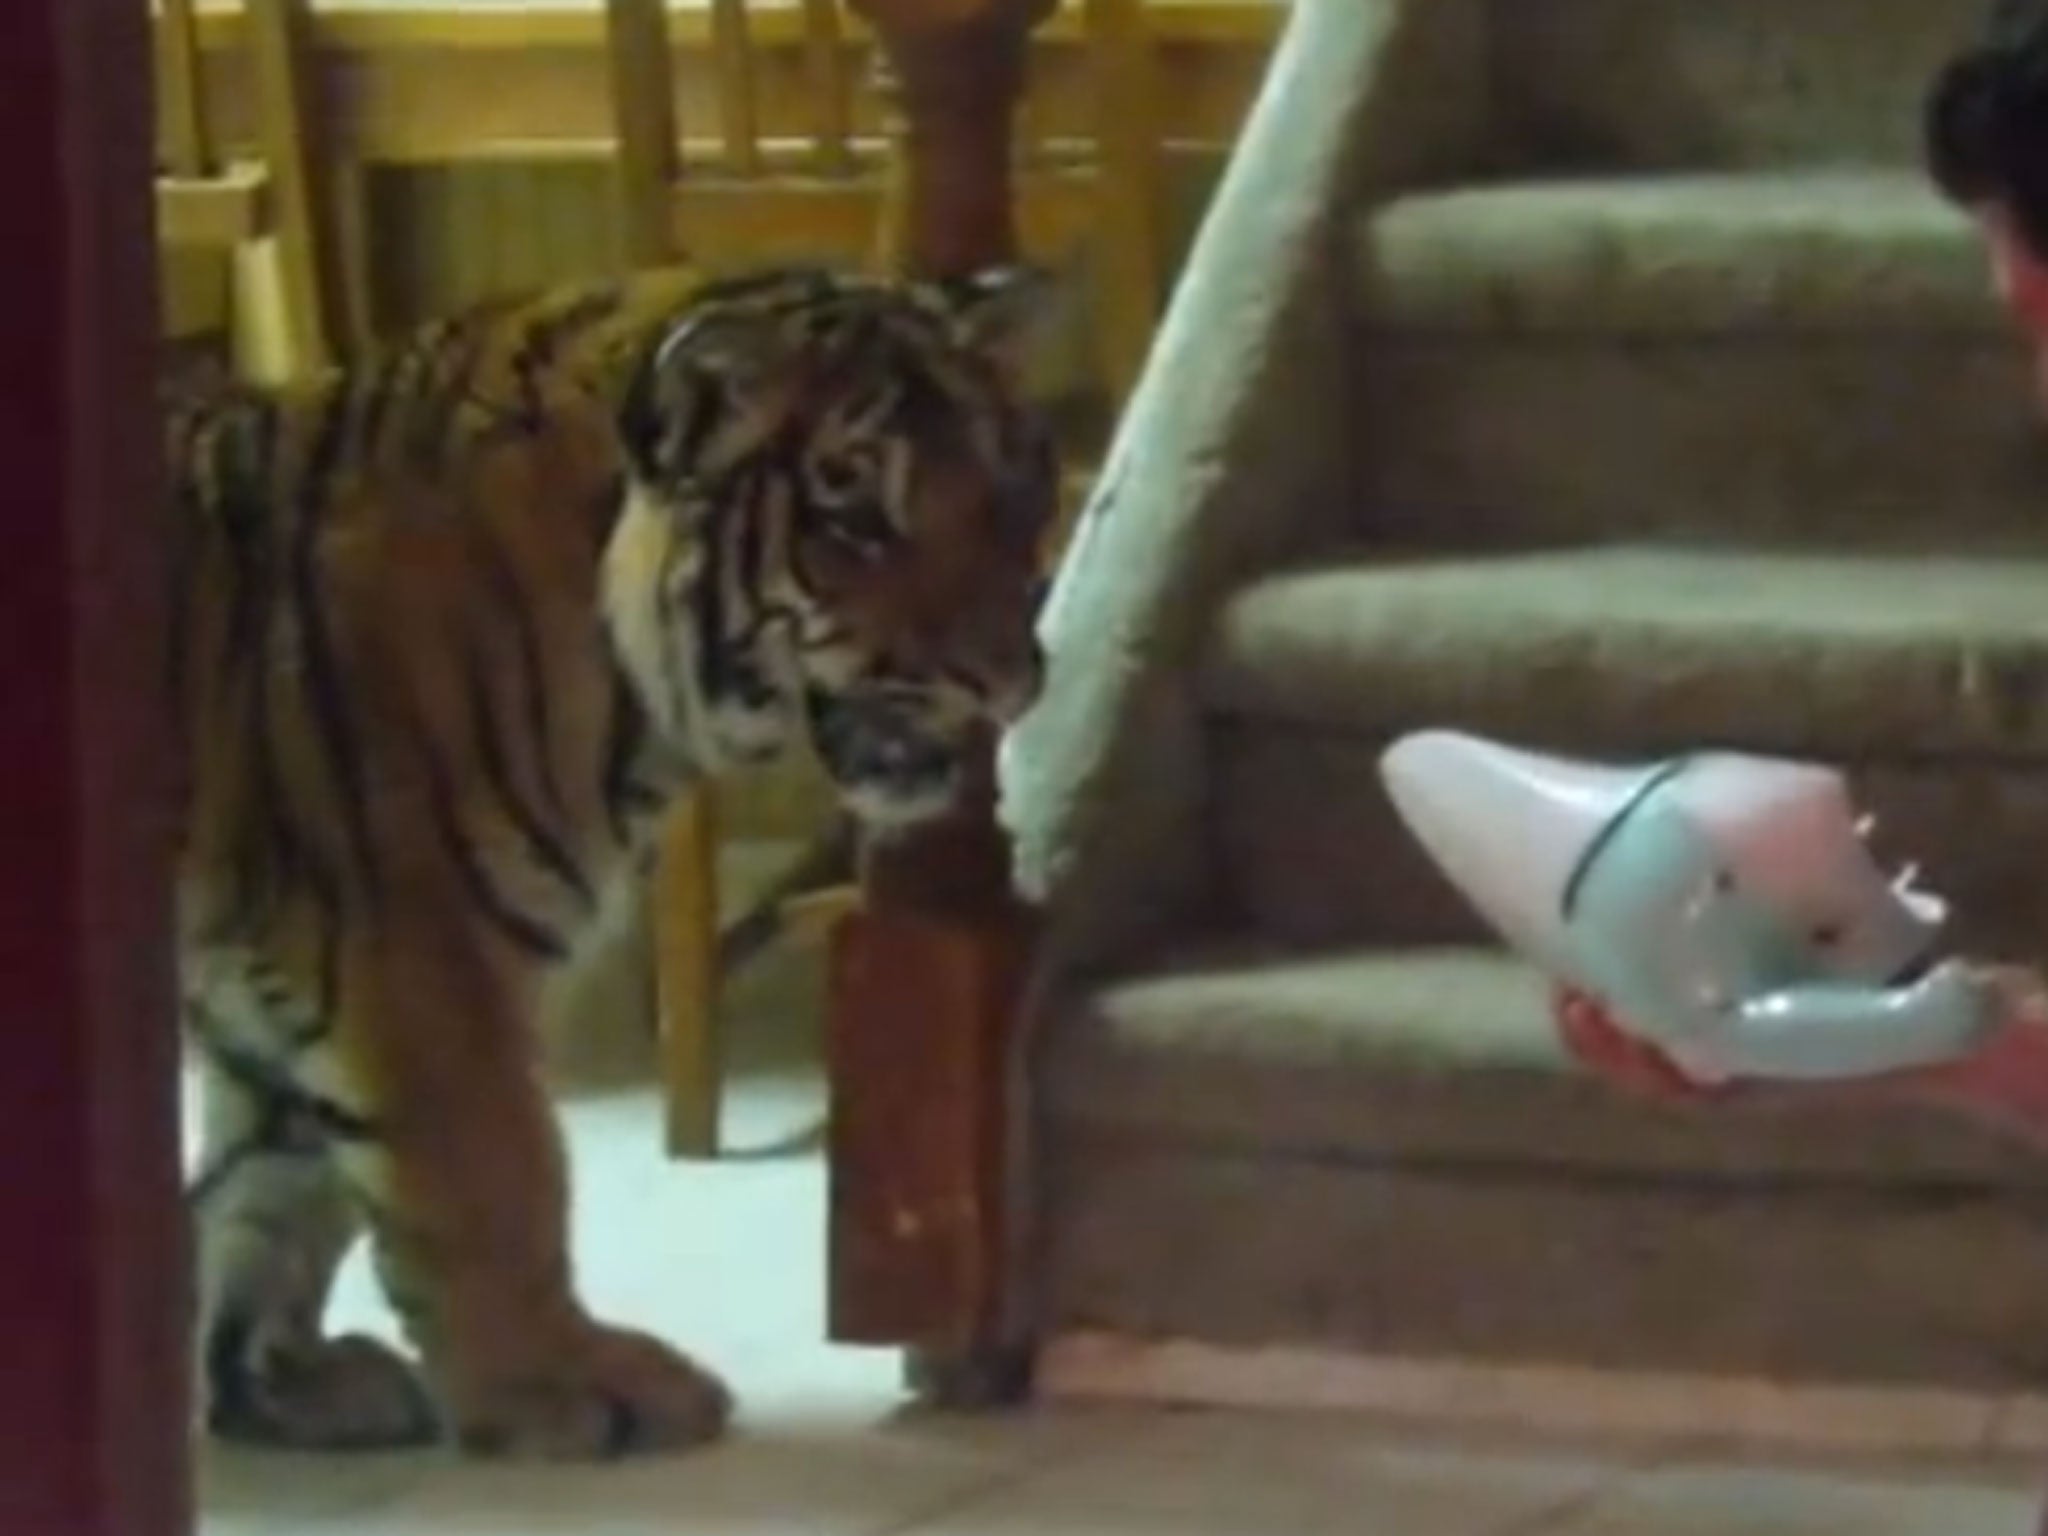 Home videos showed the extraordinary upbringing of Jonas the tiger - in this case facing up to a particularly scary dustbuster